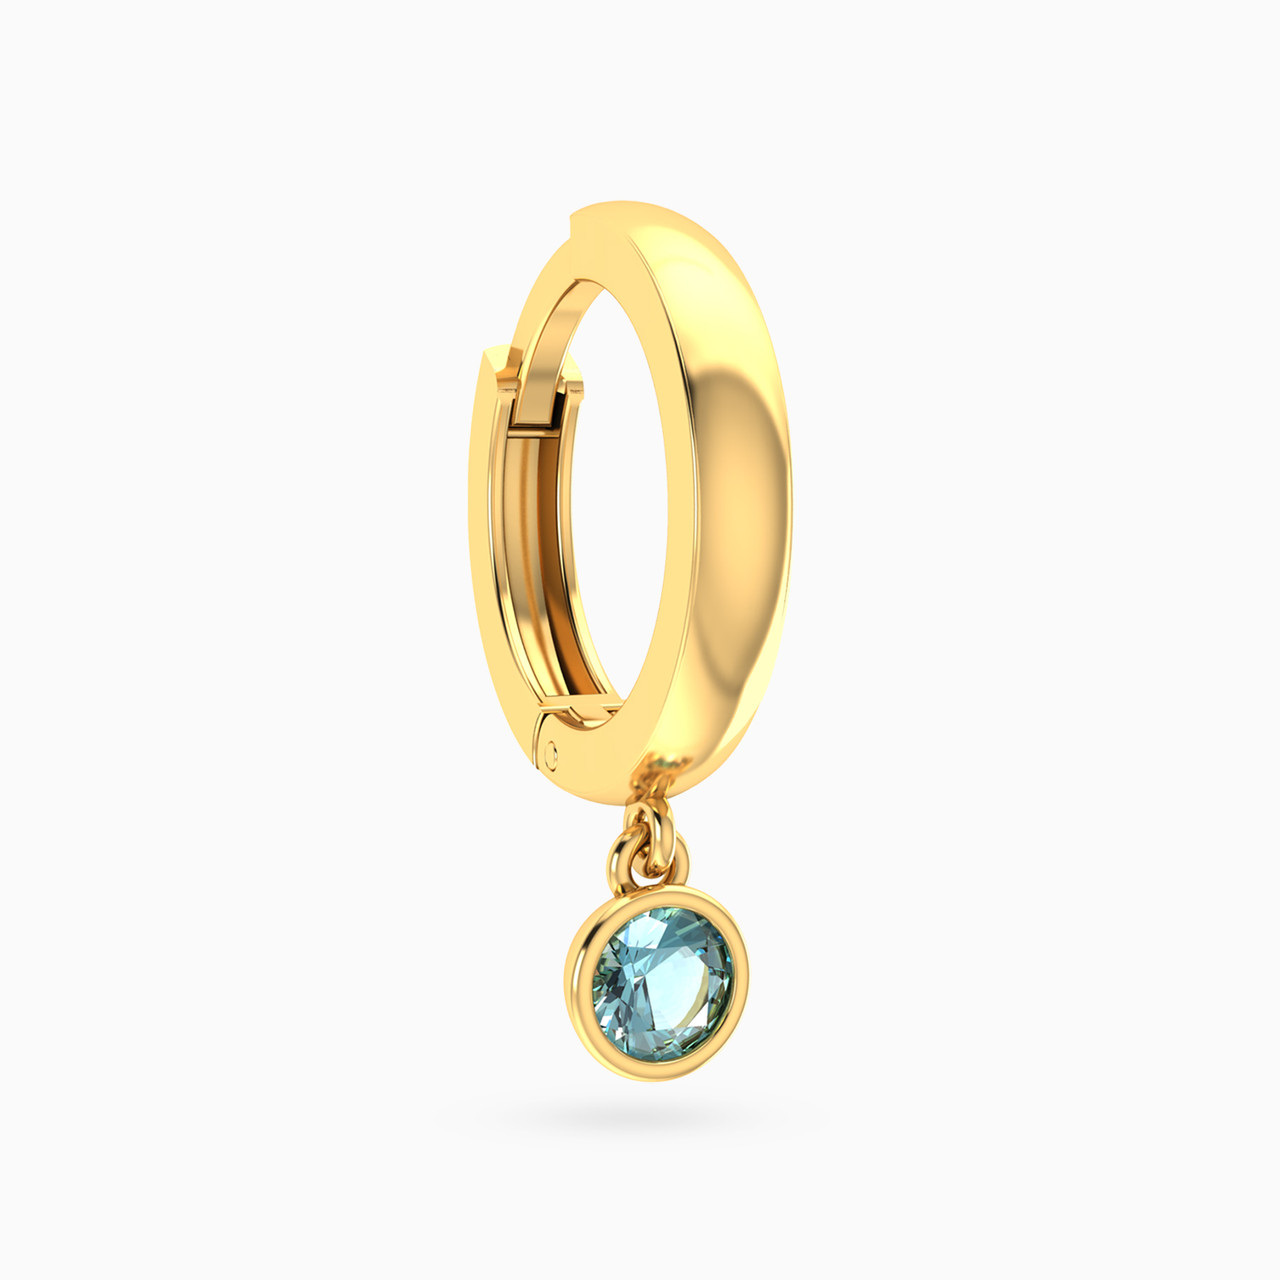 Round Shaped Colored Stones Hoop Earring in 14K Gold